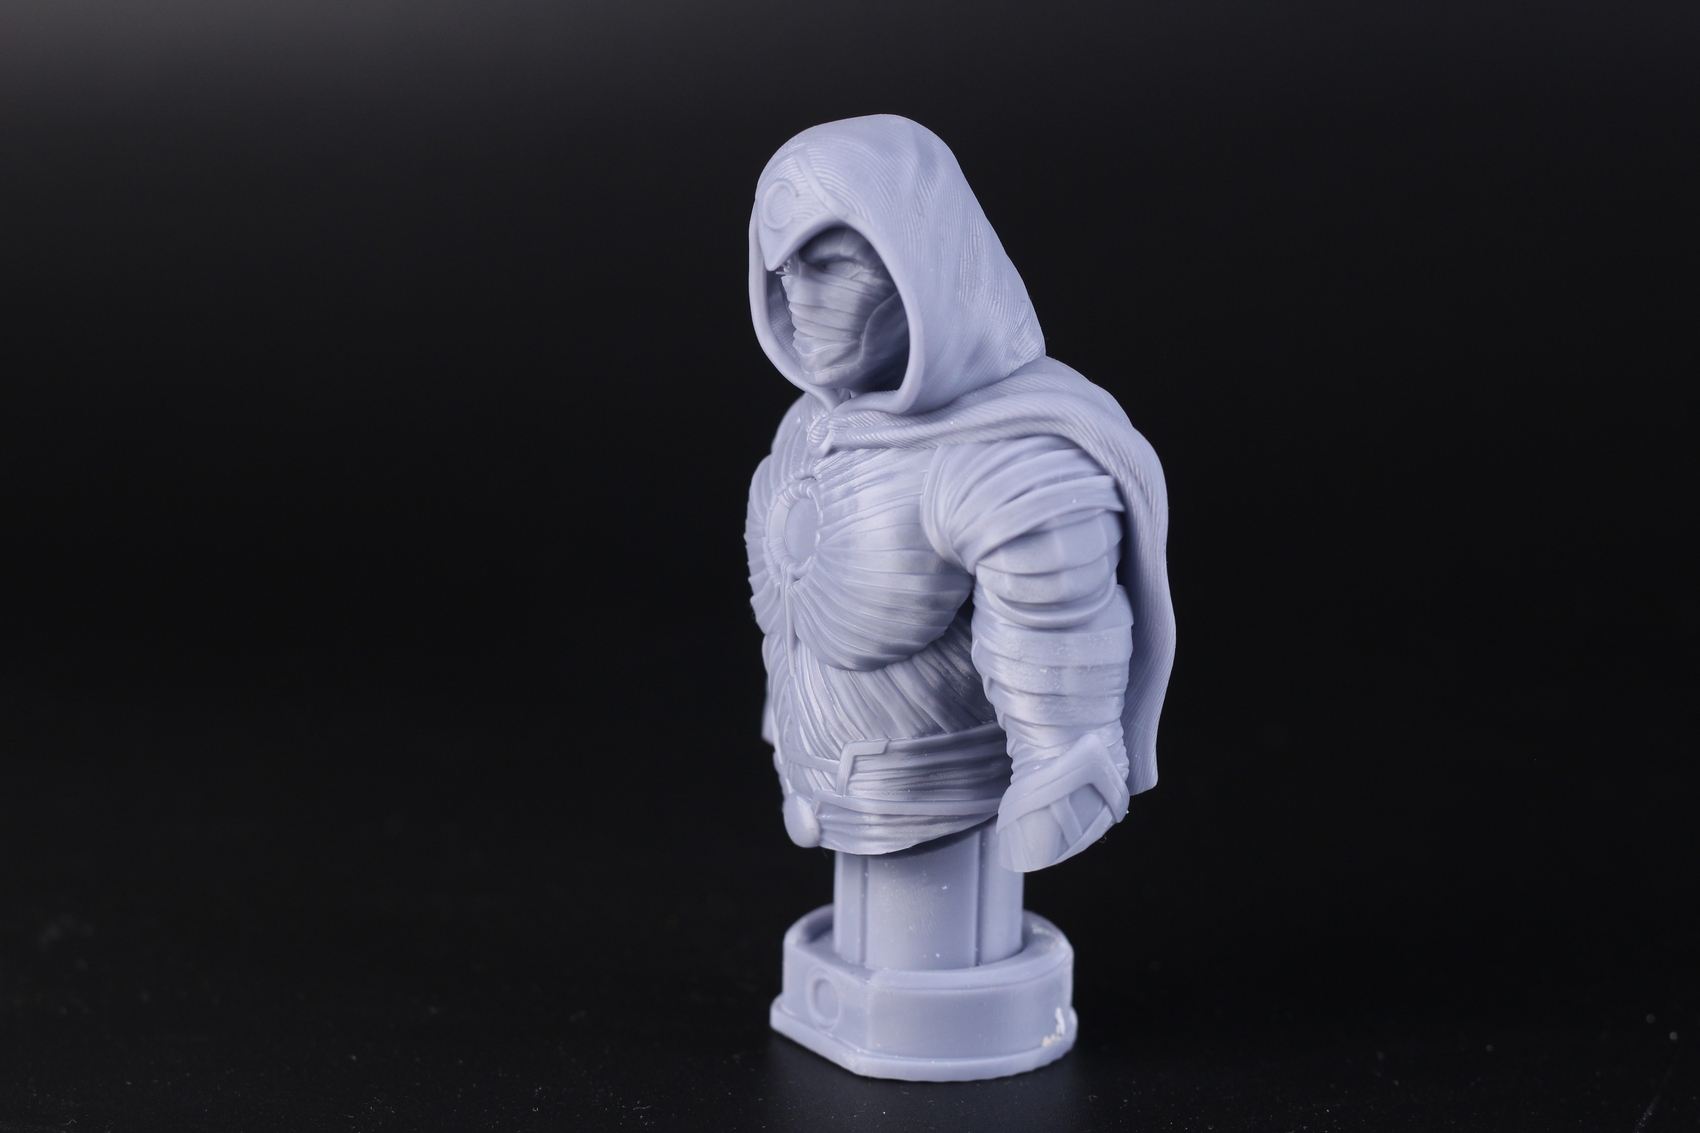 Moon Knight Bust Anycubic Photon M3 Review3 | Anycubic Photon M3 Review: Bridging the gap